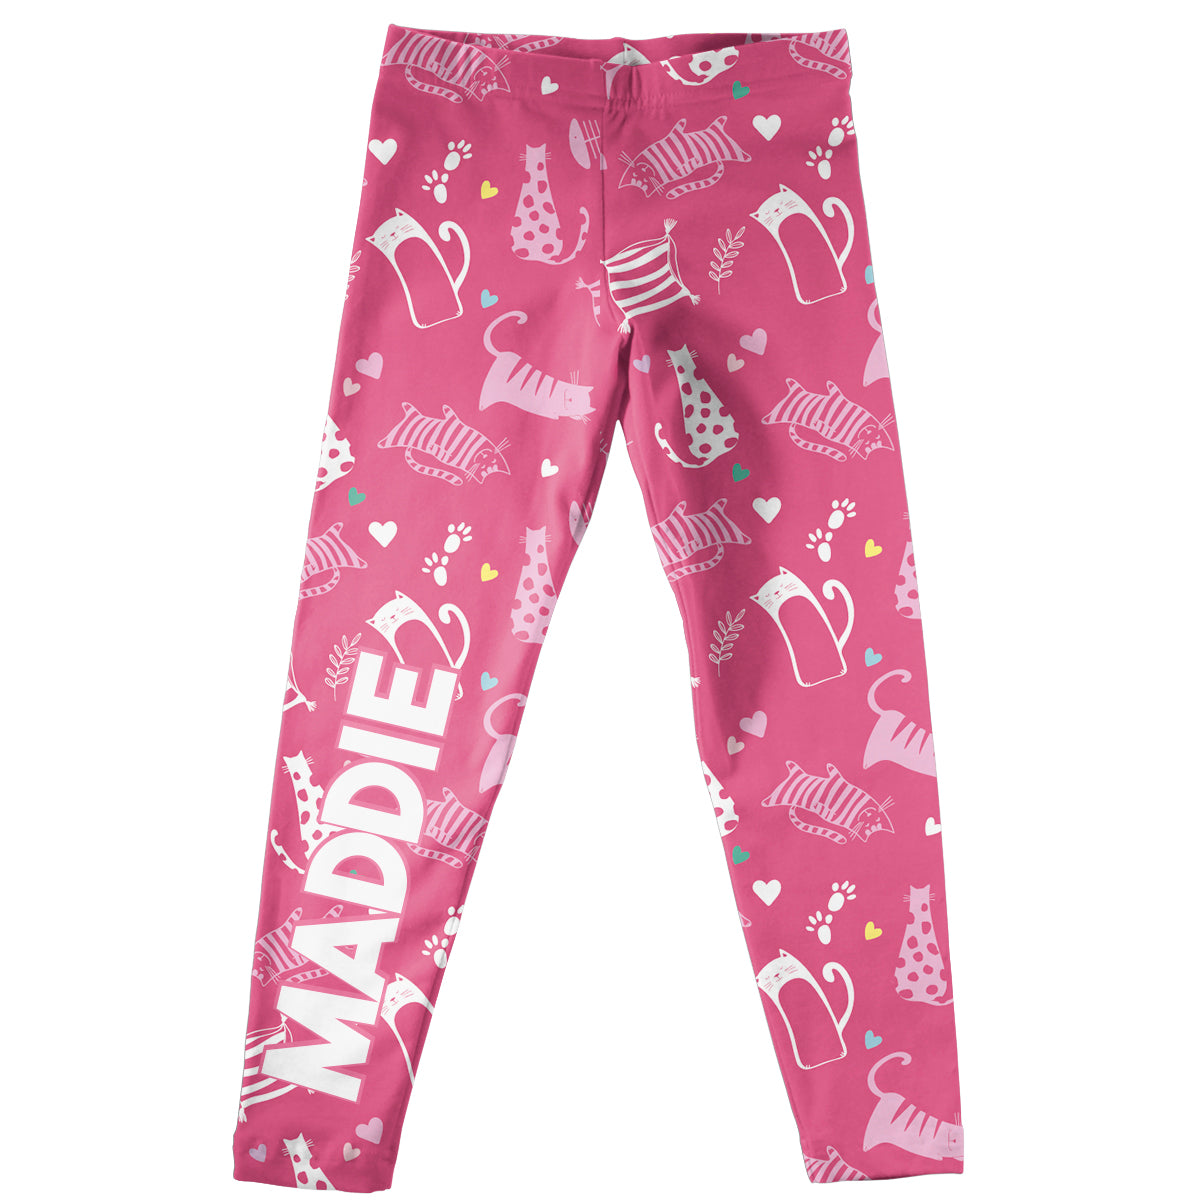 Cats Print Name Pink Leggings - Wimziy&Co.